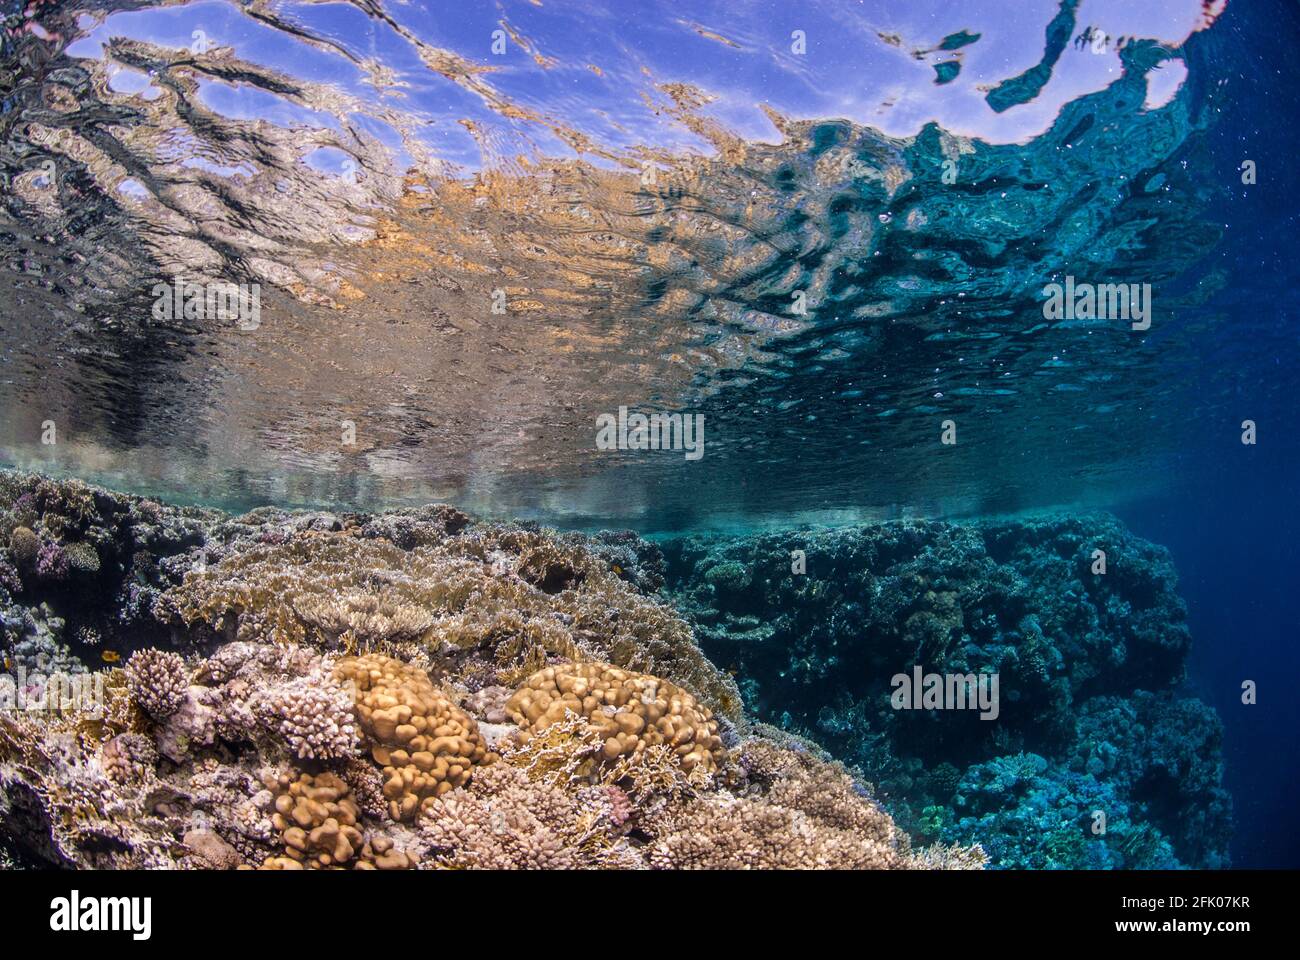 fringing coral reef